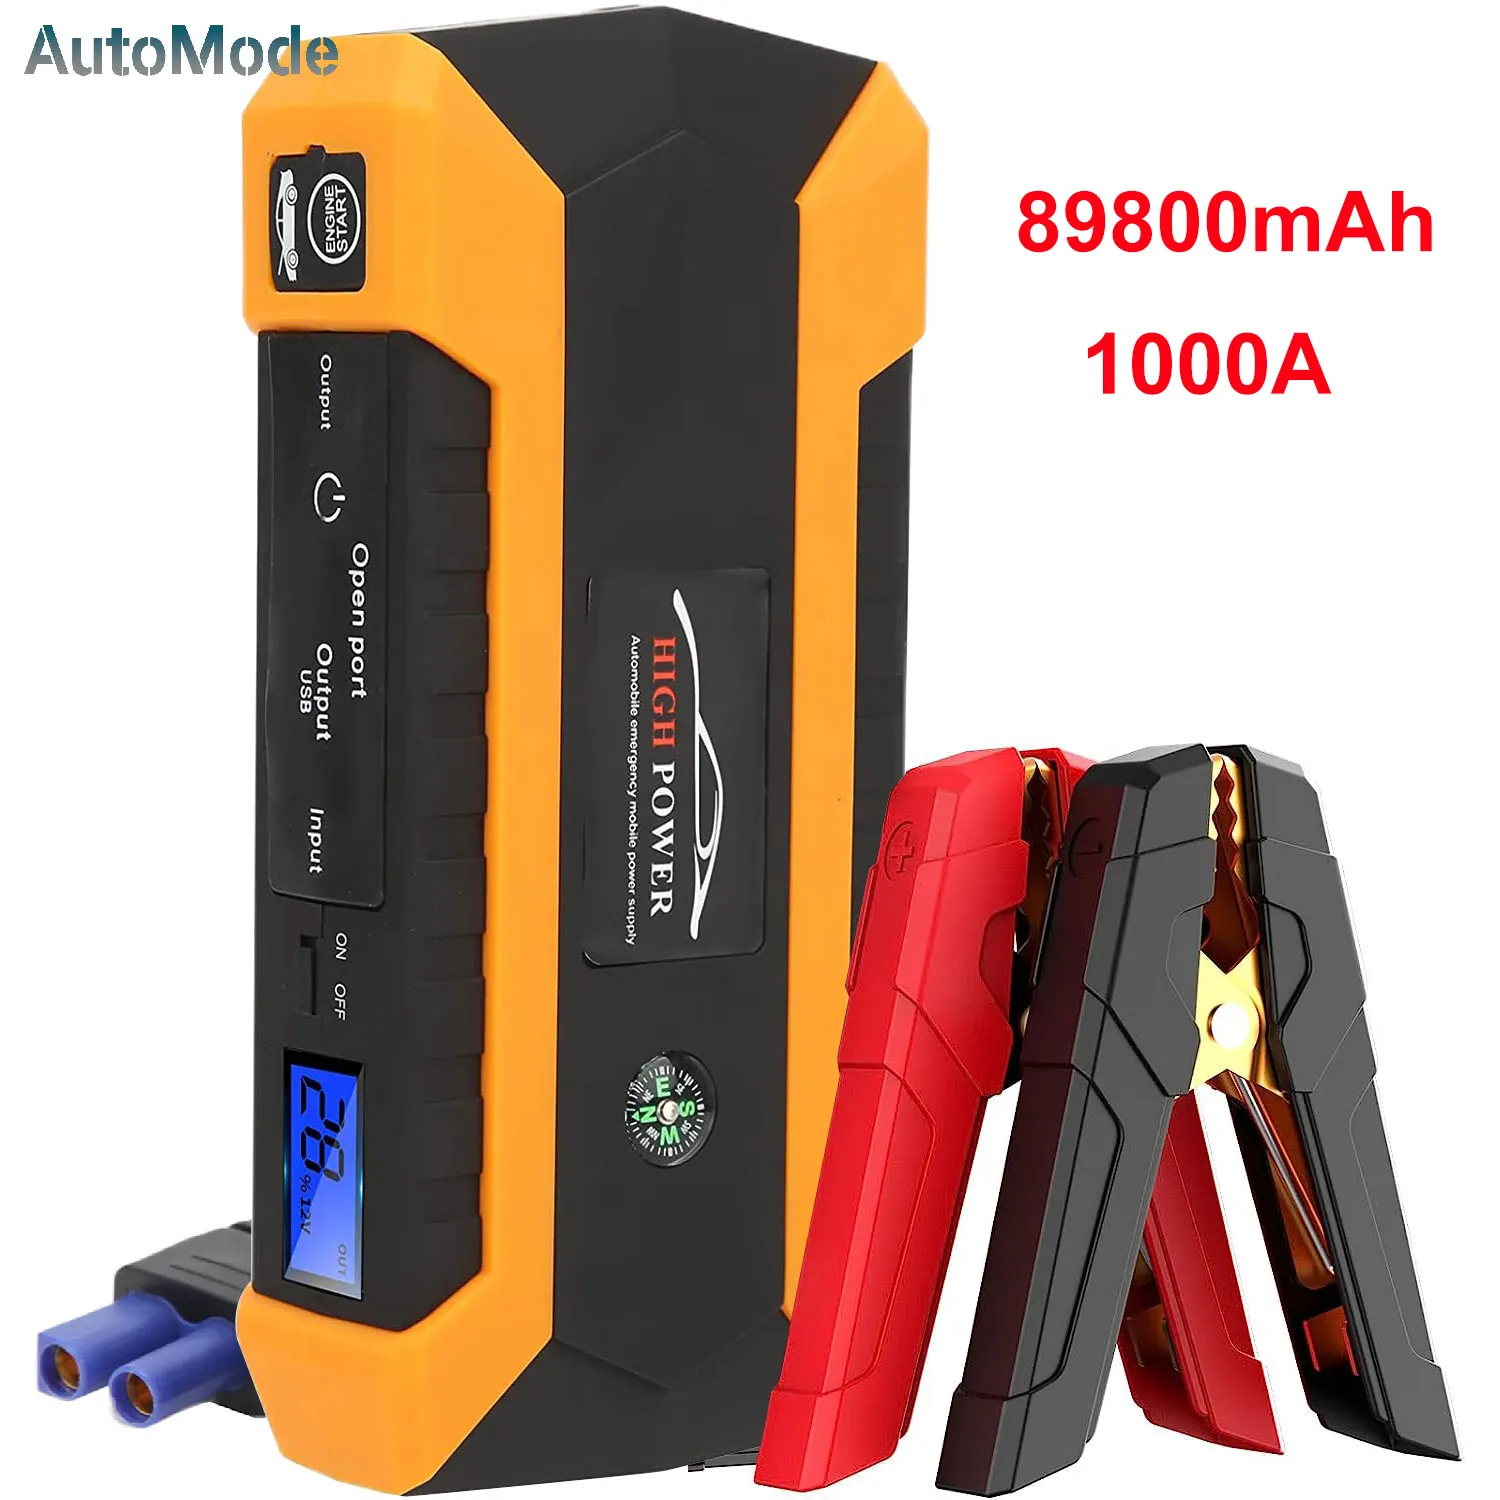 

Car Jump Starter 89800mAh 1000A Power Bank 12V High-power Automobile Emergency Starting Power Supply For Diesel Gasoline Vehicle